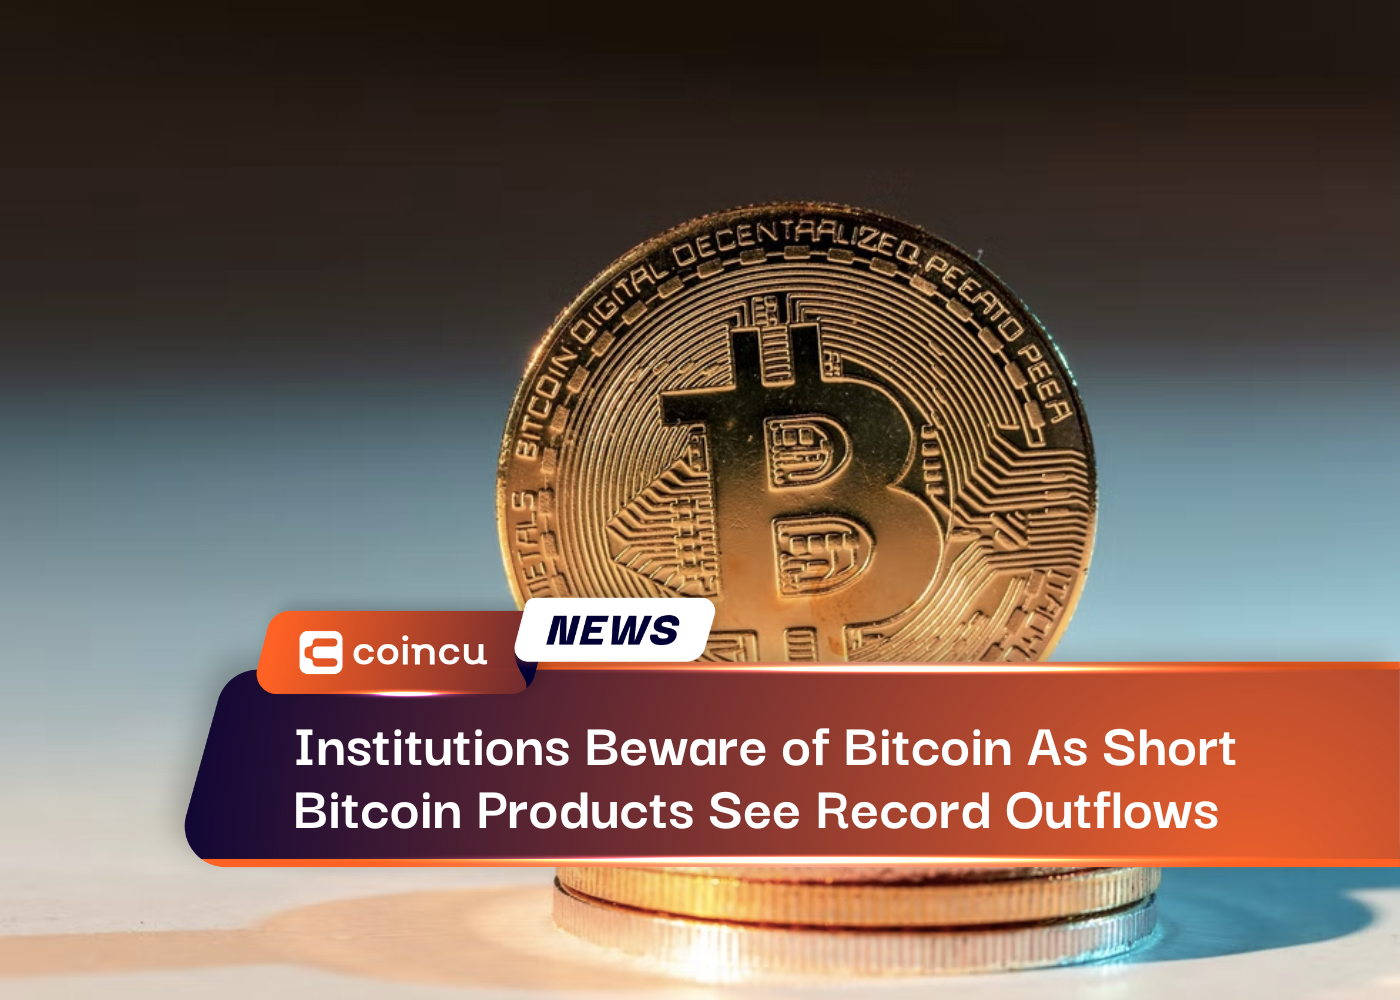 Institutions Beware of Bitcoin As Short Bitcoin Products See Record Outflows